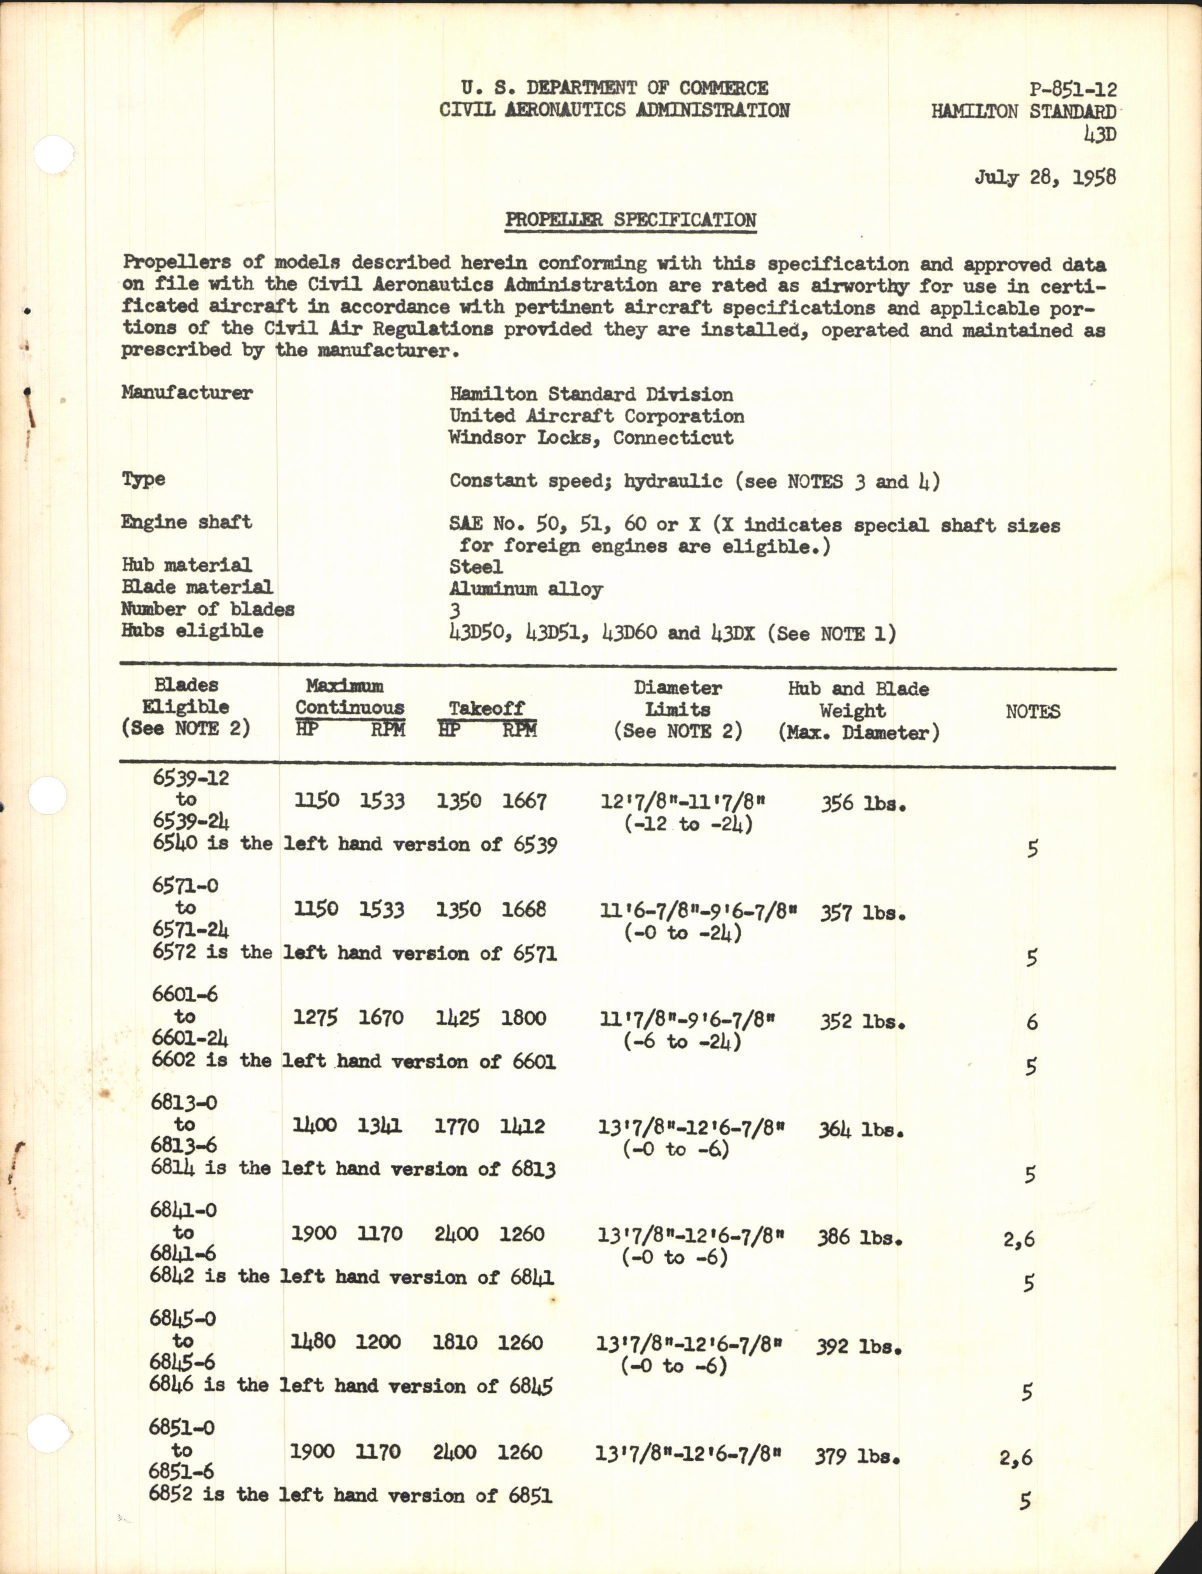 Sample page 1 from AirCorps Library document: Propeller Specification for 43D Propellers